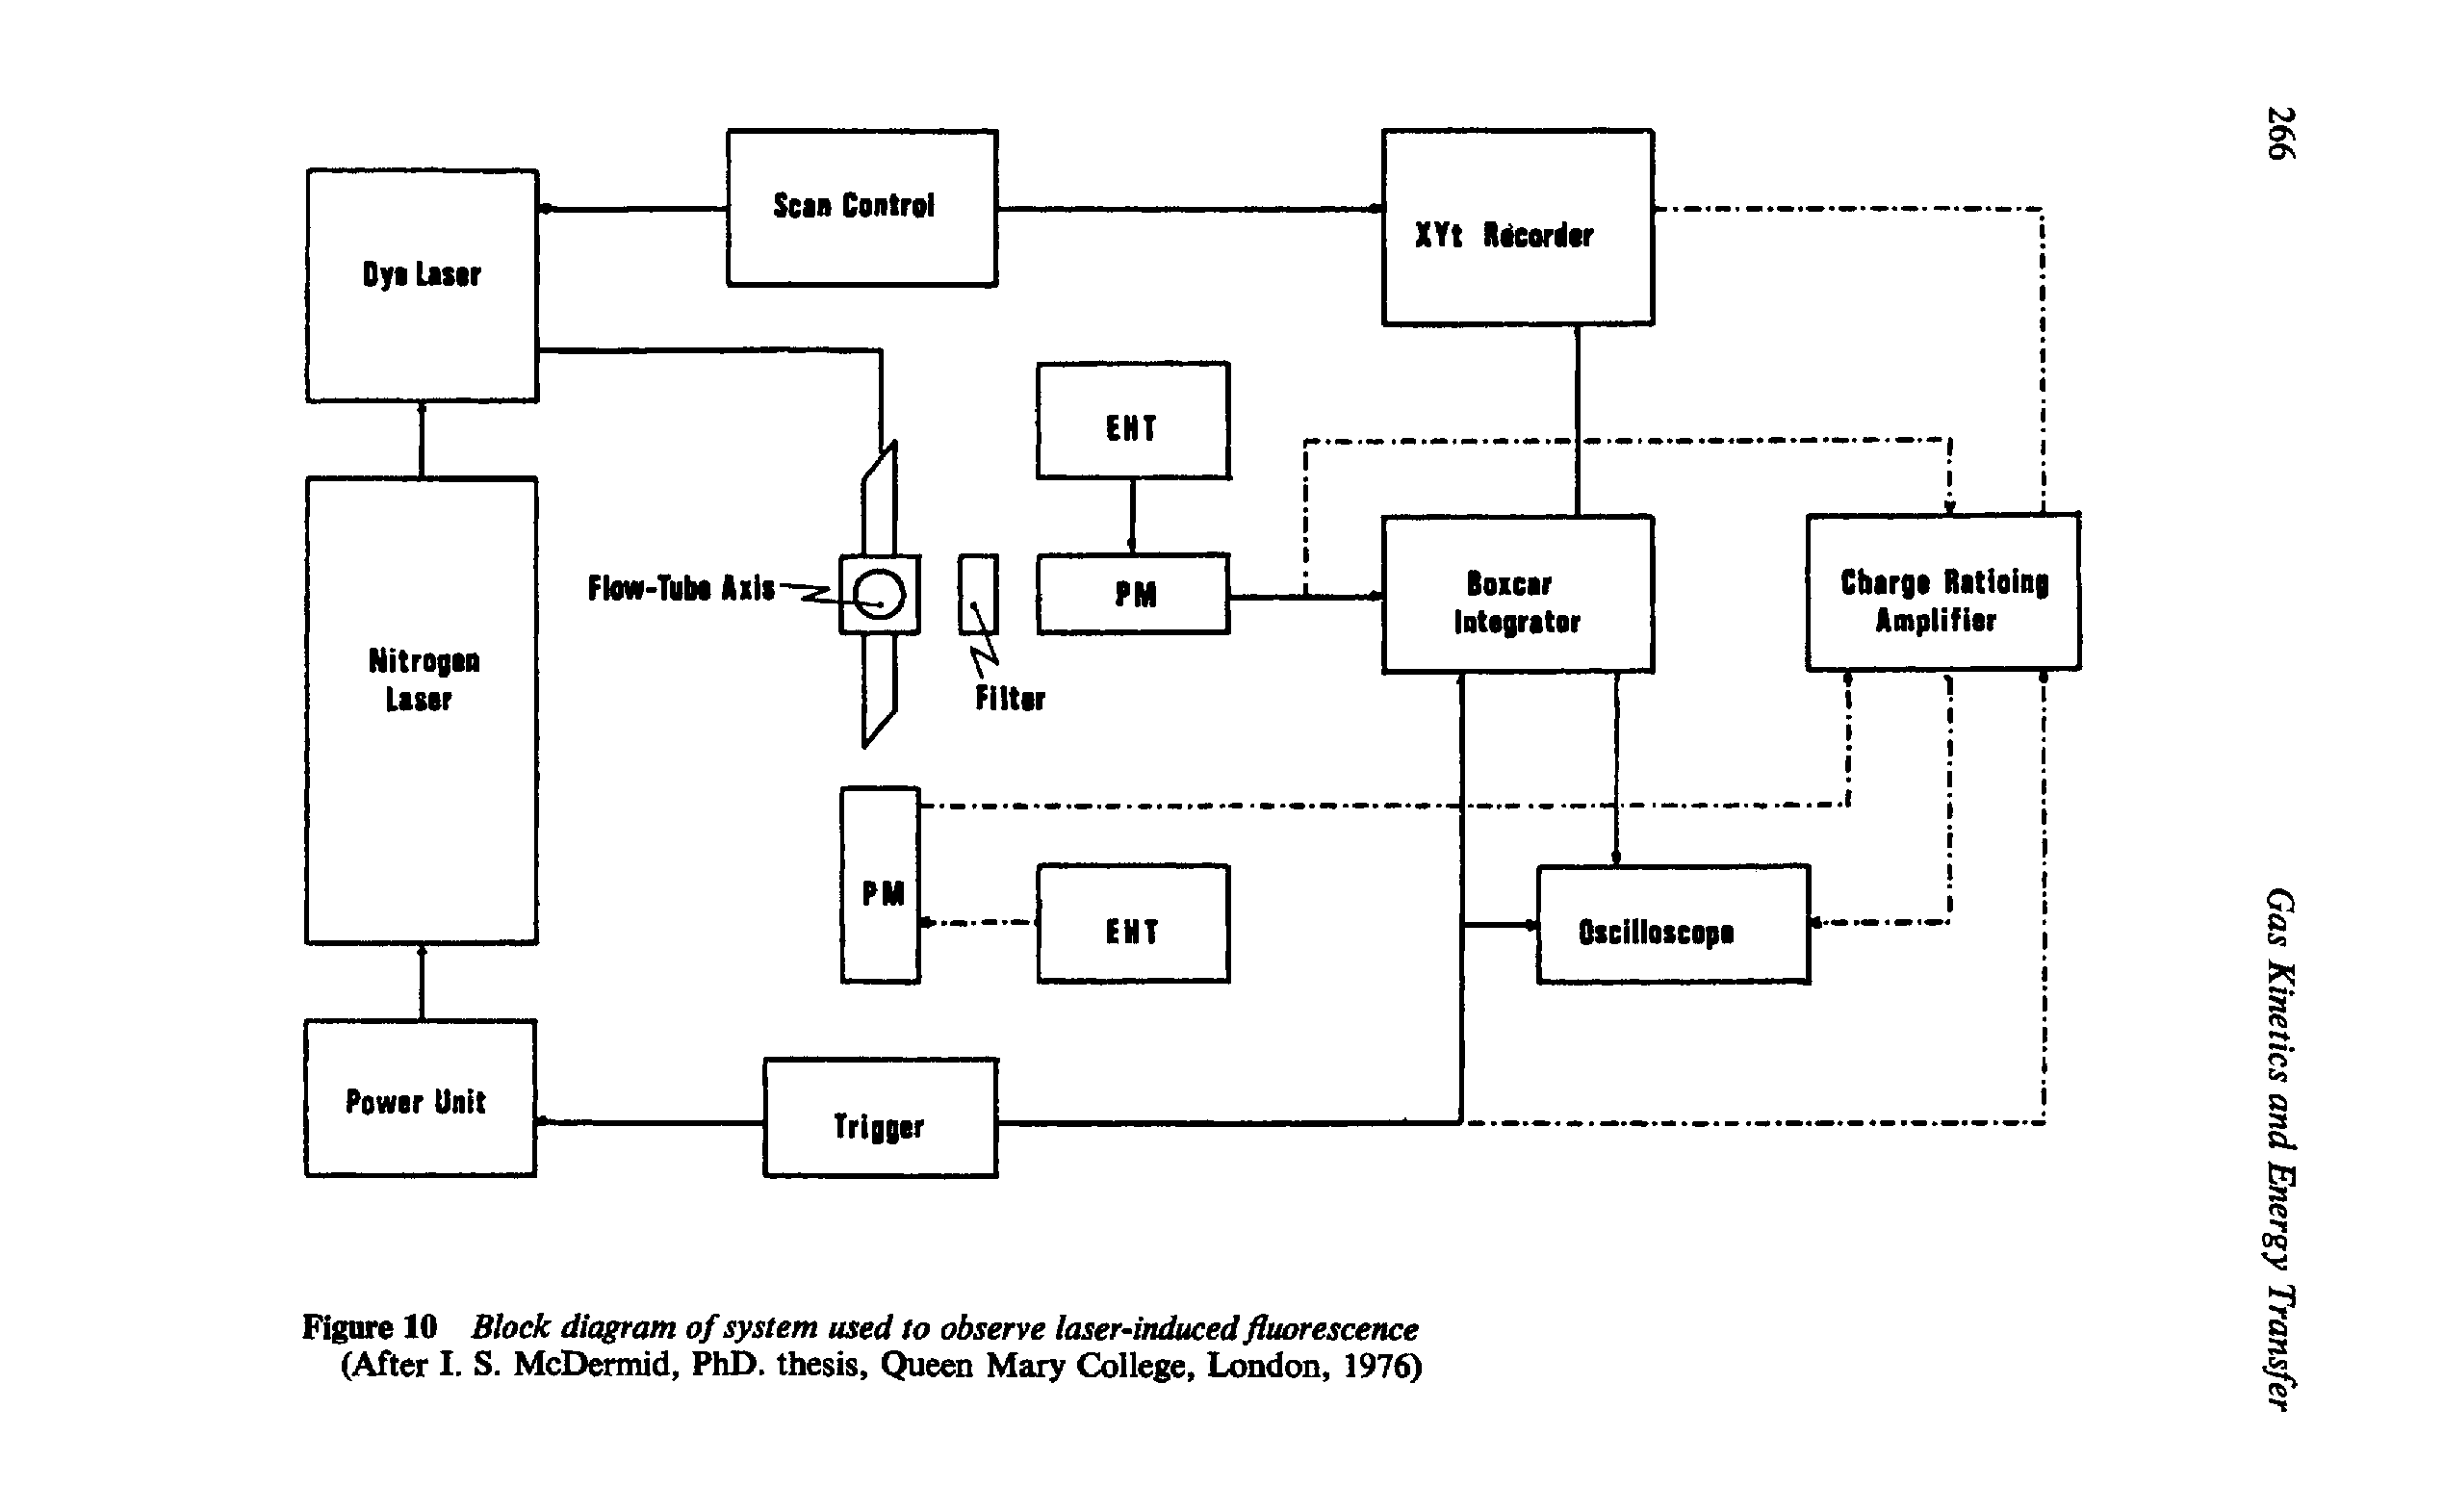 Figure 10 Block diagram of system used to observe laser induced fluorescence (After I. S. McDermid, PhD. thesis. Queen Mary College, London, 1976)...